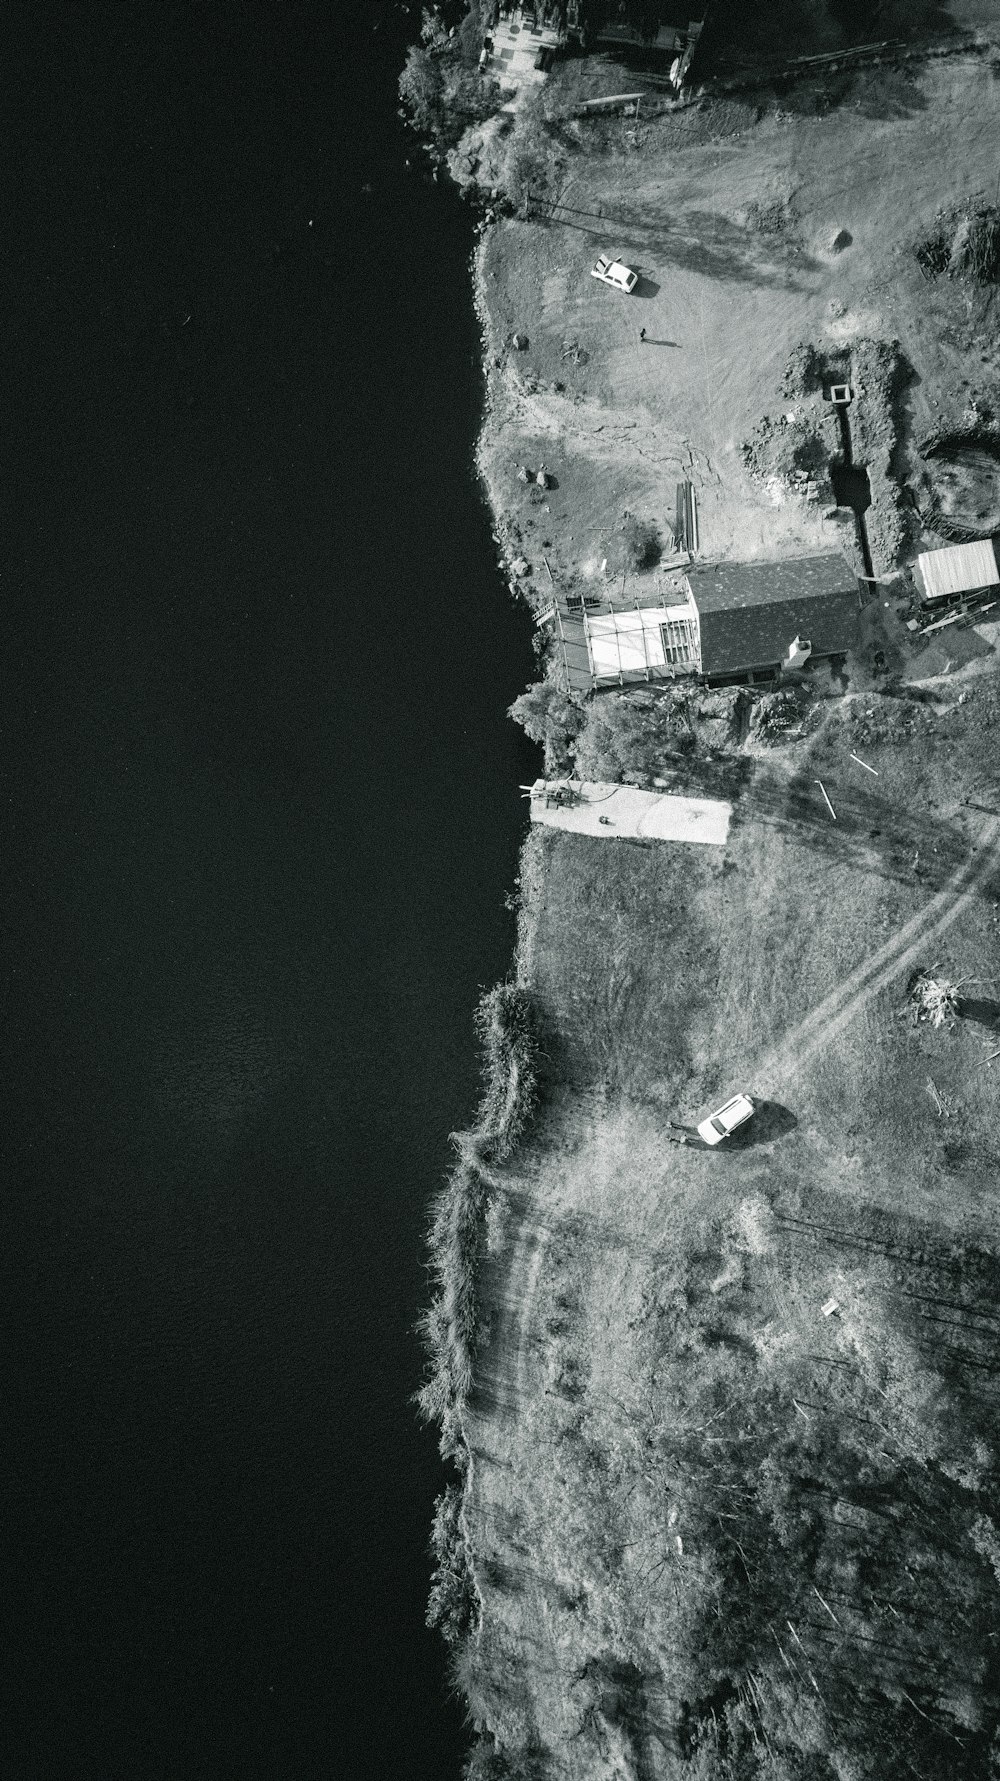 aerial view of houses near body of water